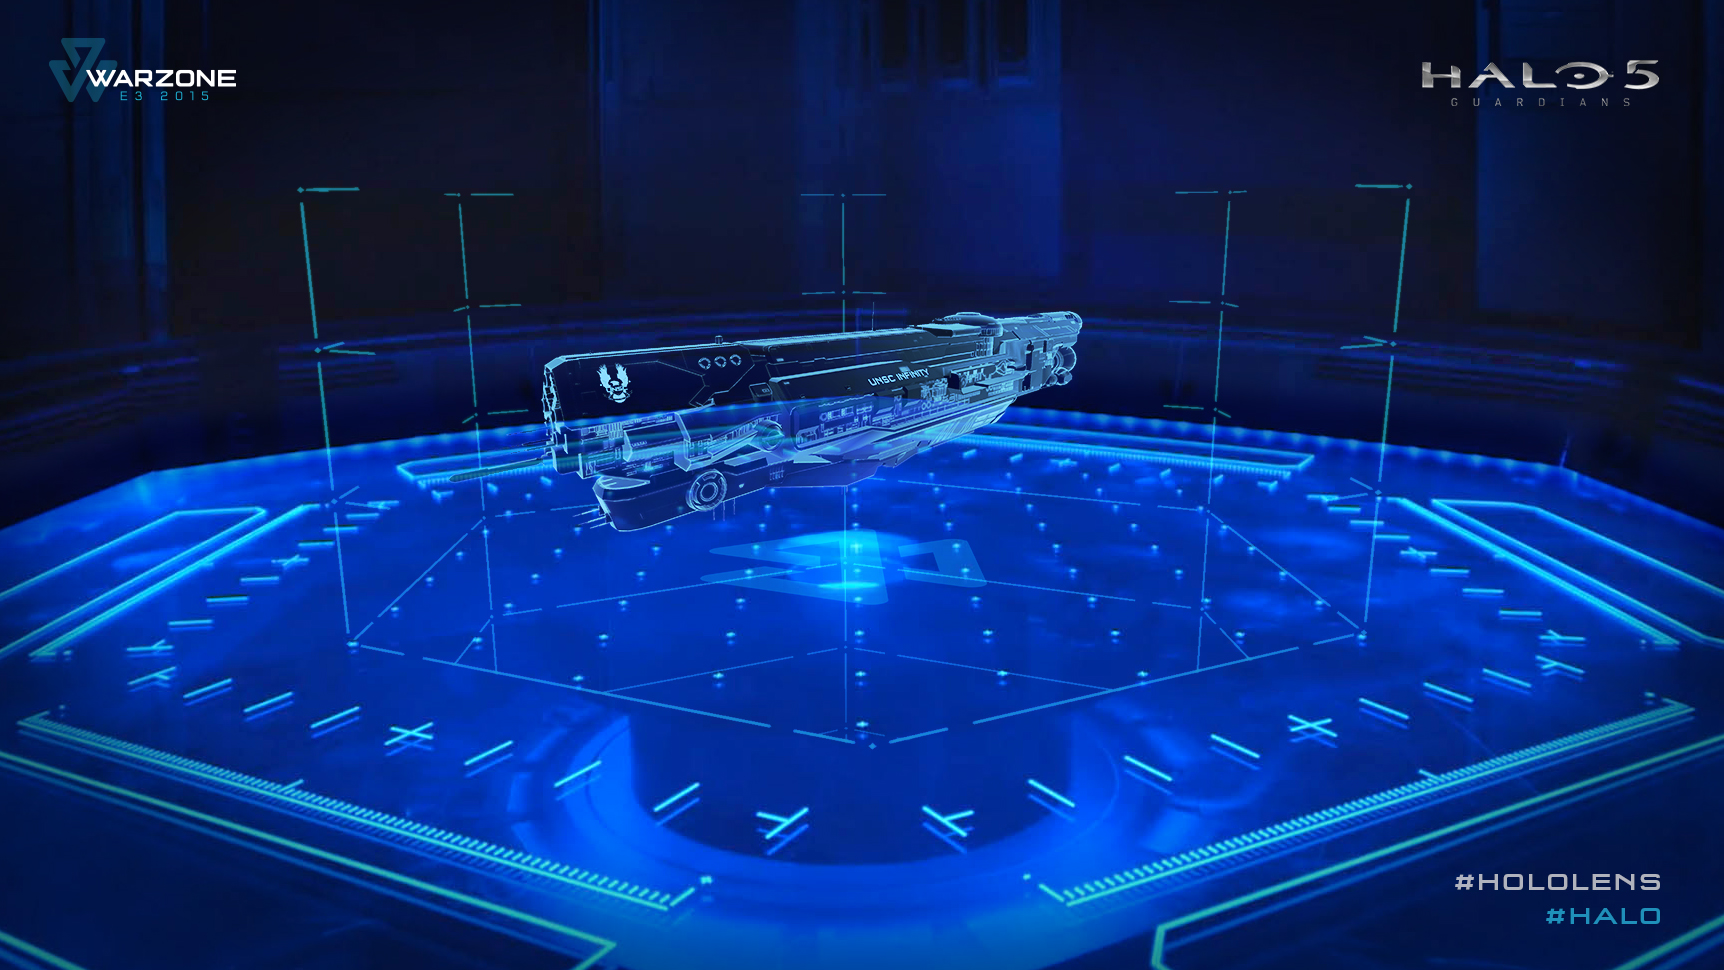 A Holographic Halo 5 Soldier Just Briefed Me Inside Microsoft’s HoloLens